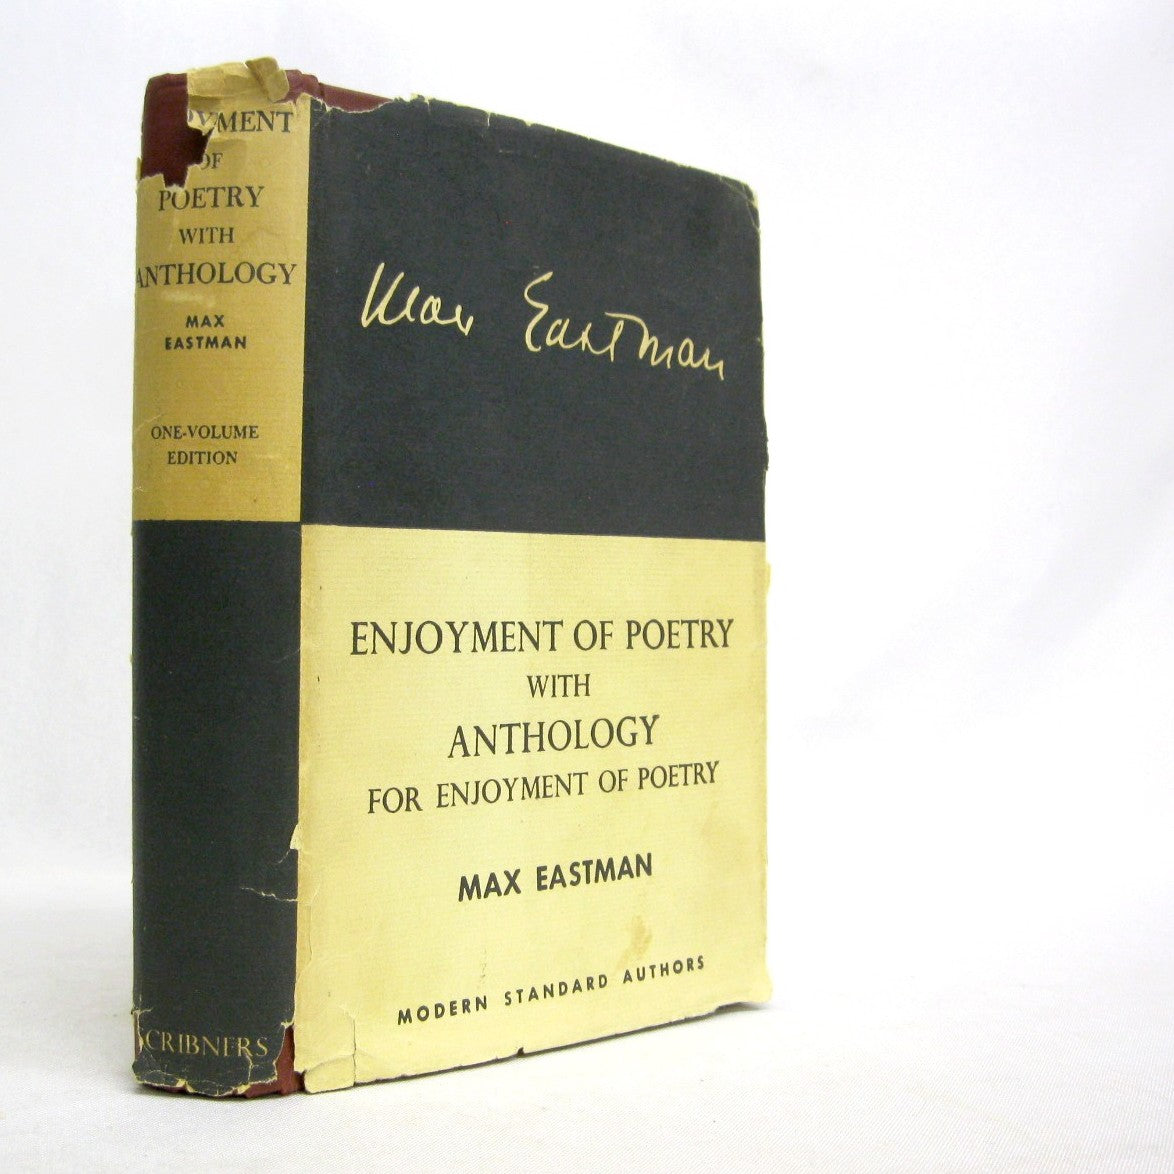 Enjoyment of Poetry Anthology by Max Eastman